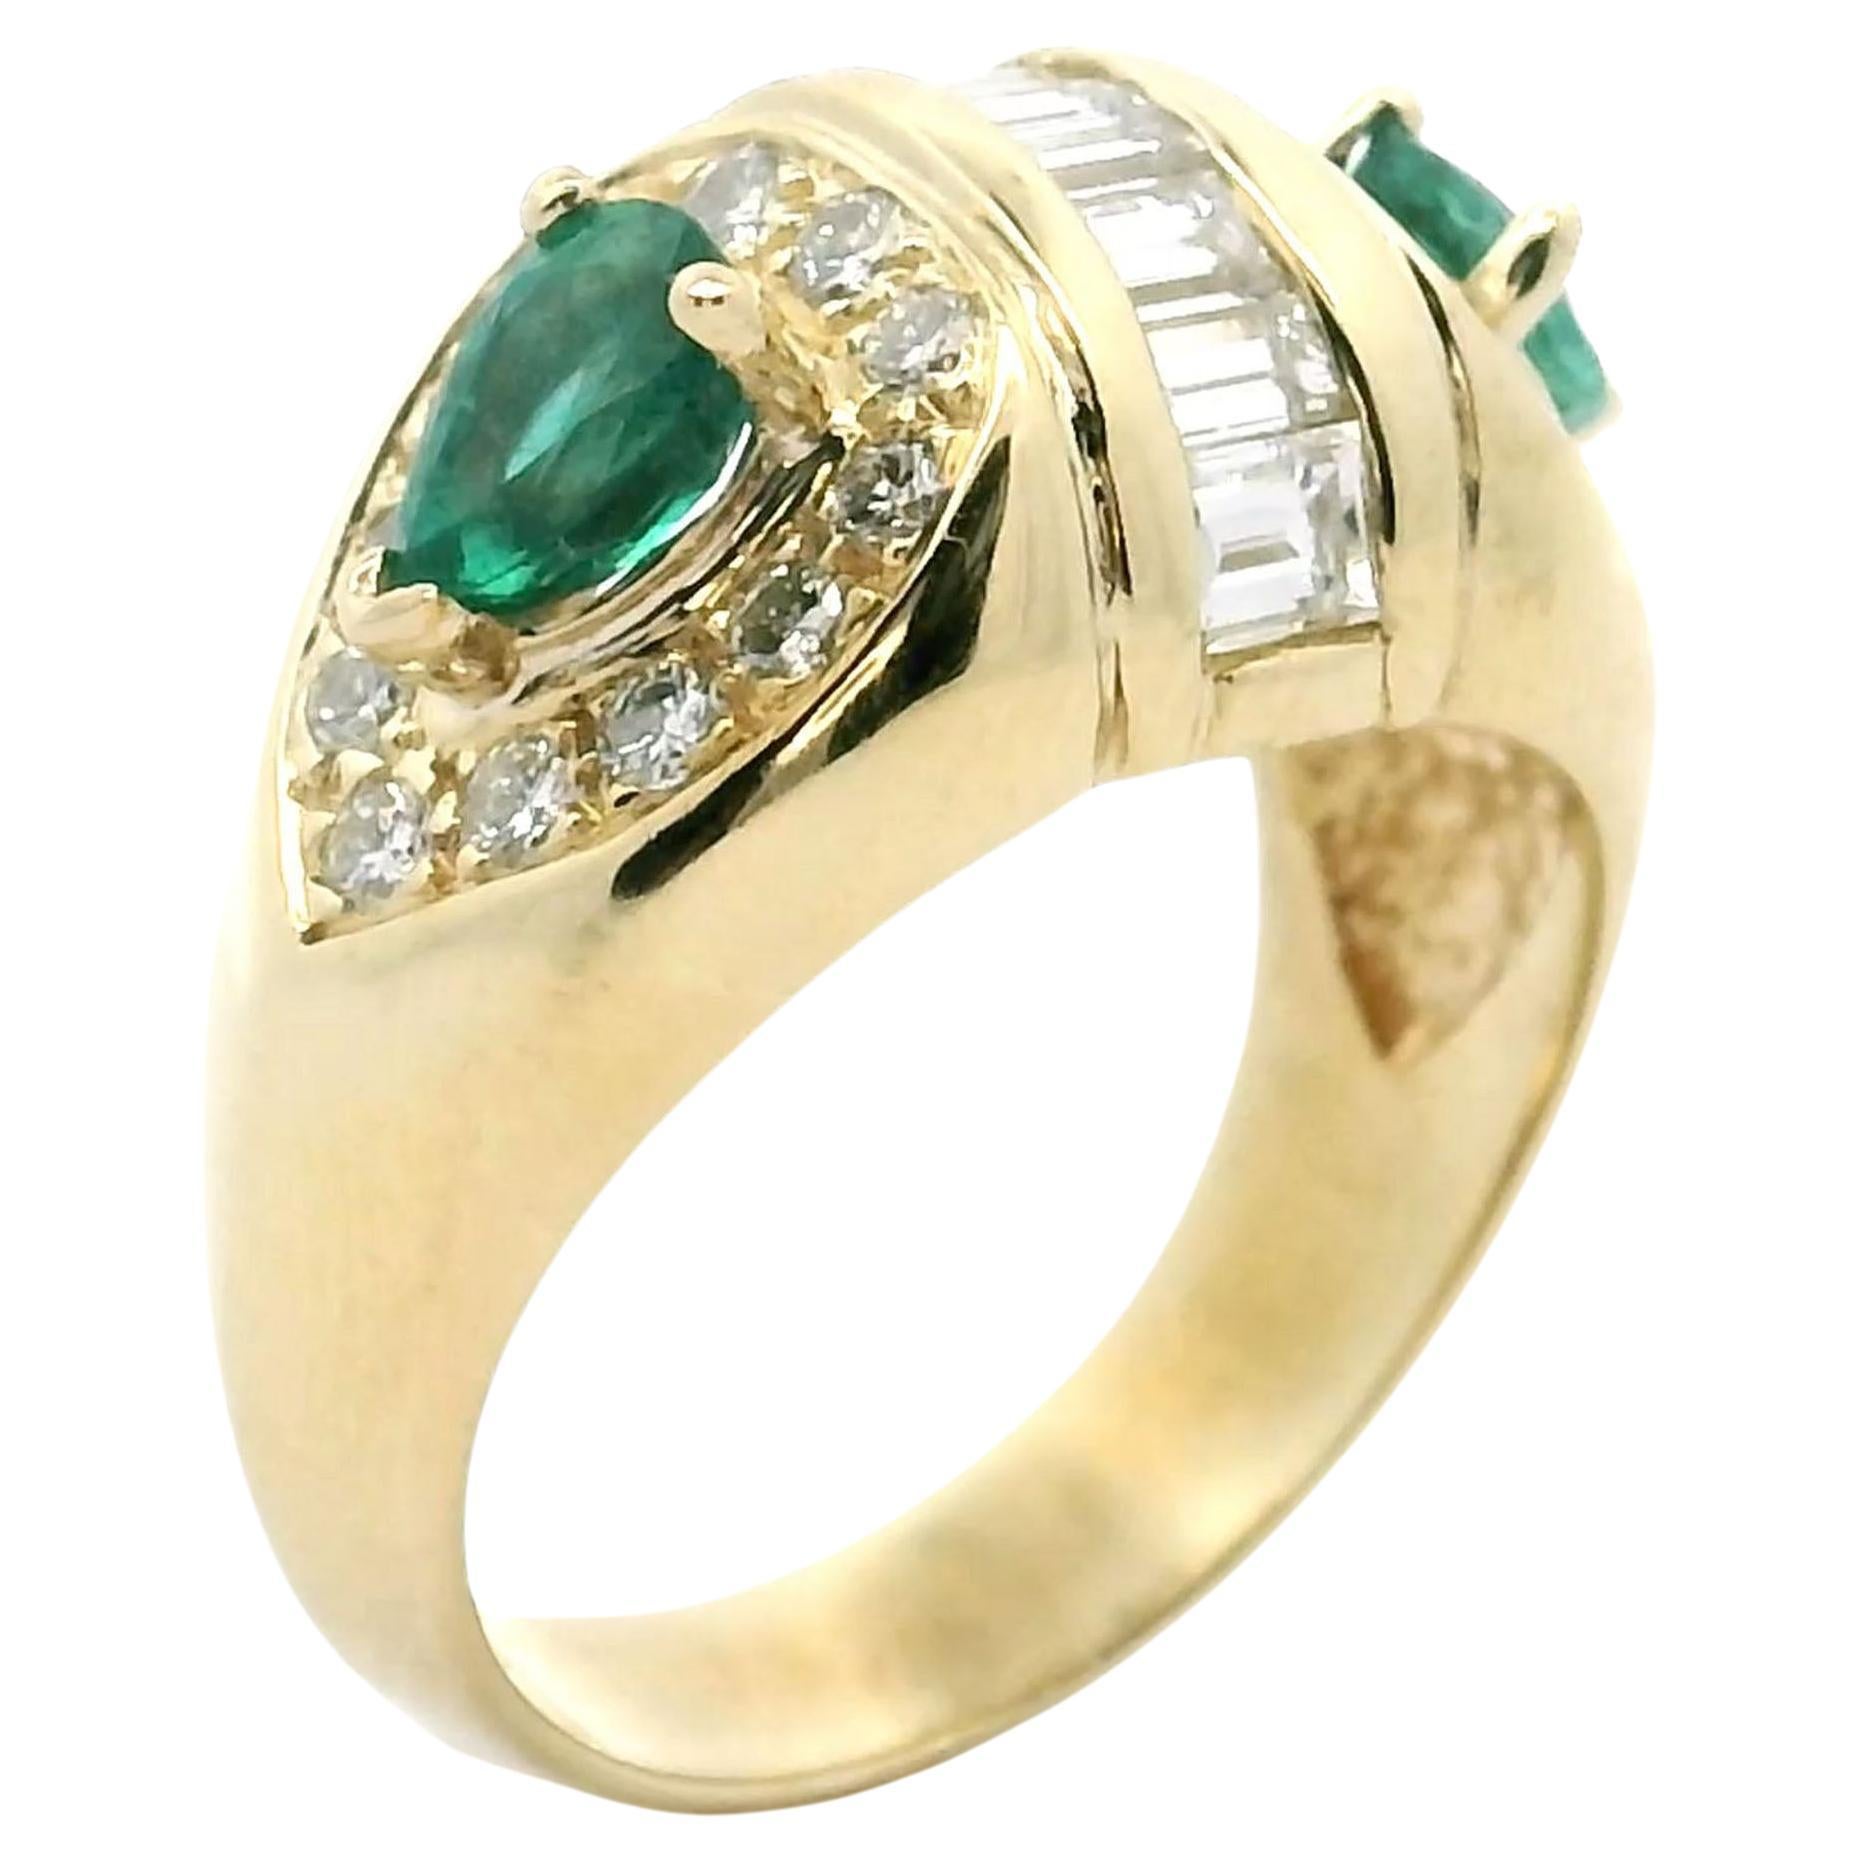 Vintage Emerald Ring with Diamonds Set in 18K Gold - Circa 1985